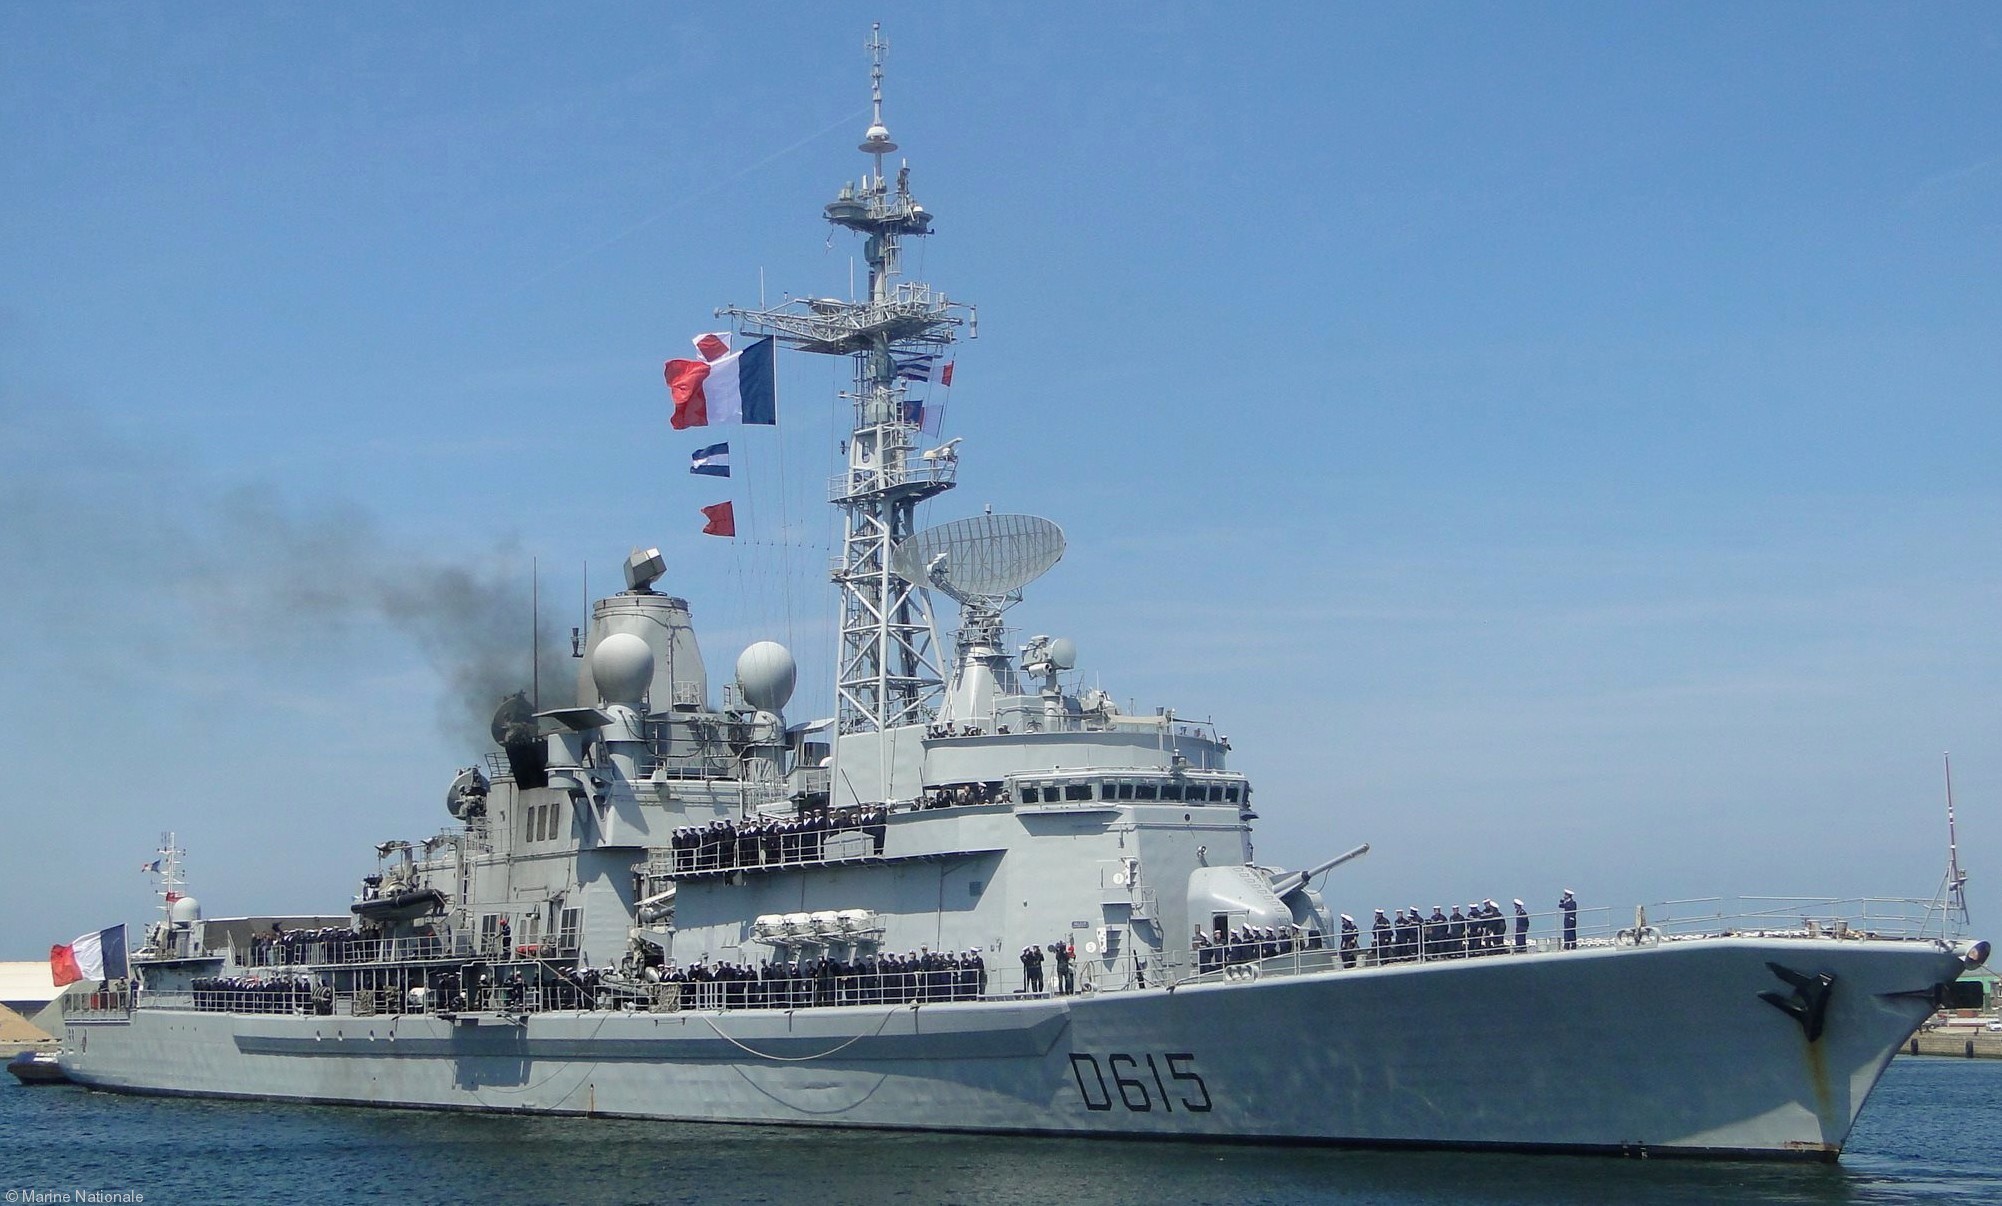 d-615 fs jean bart cassard f70aa class guided missile frigate ffgh ddg french navy marine nationale 13